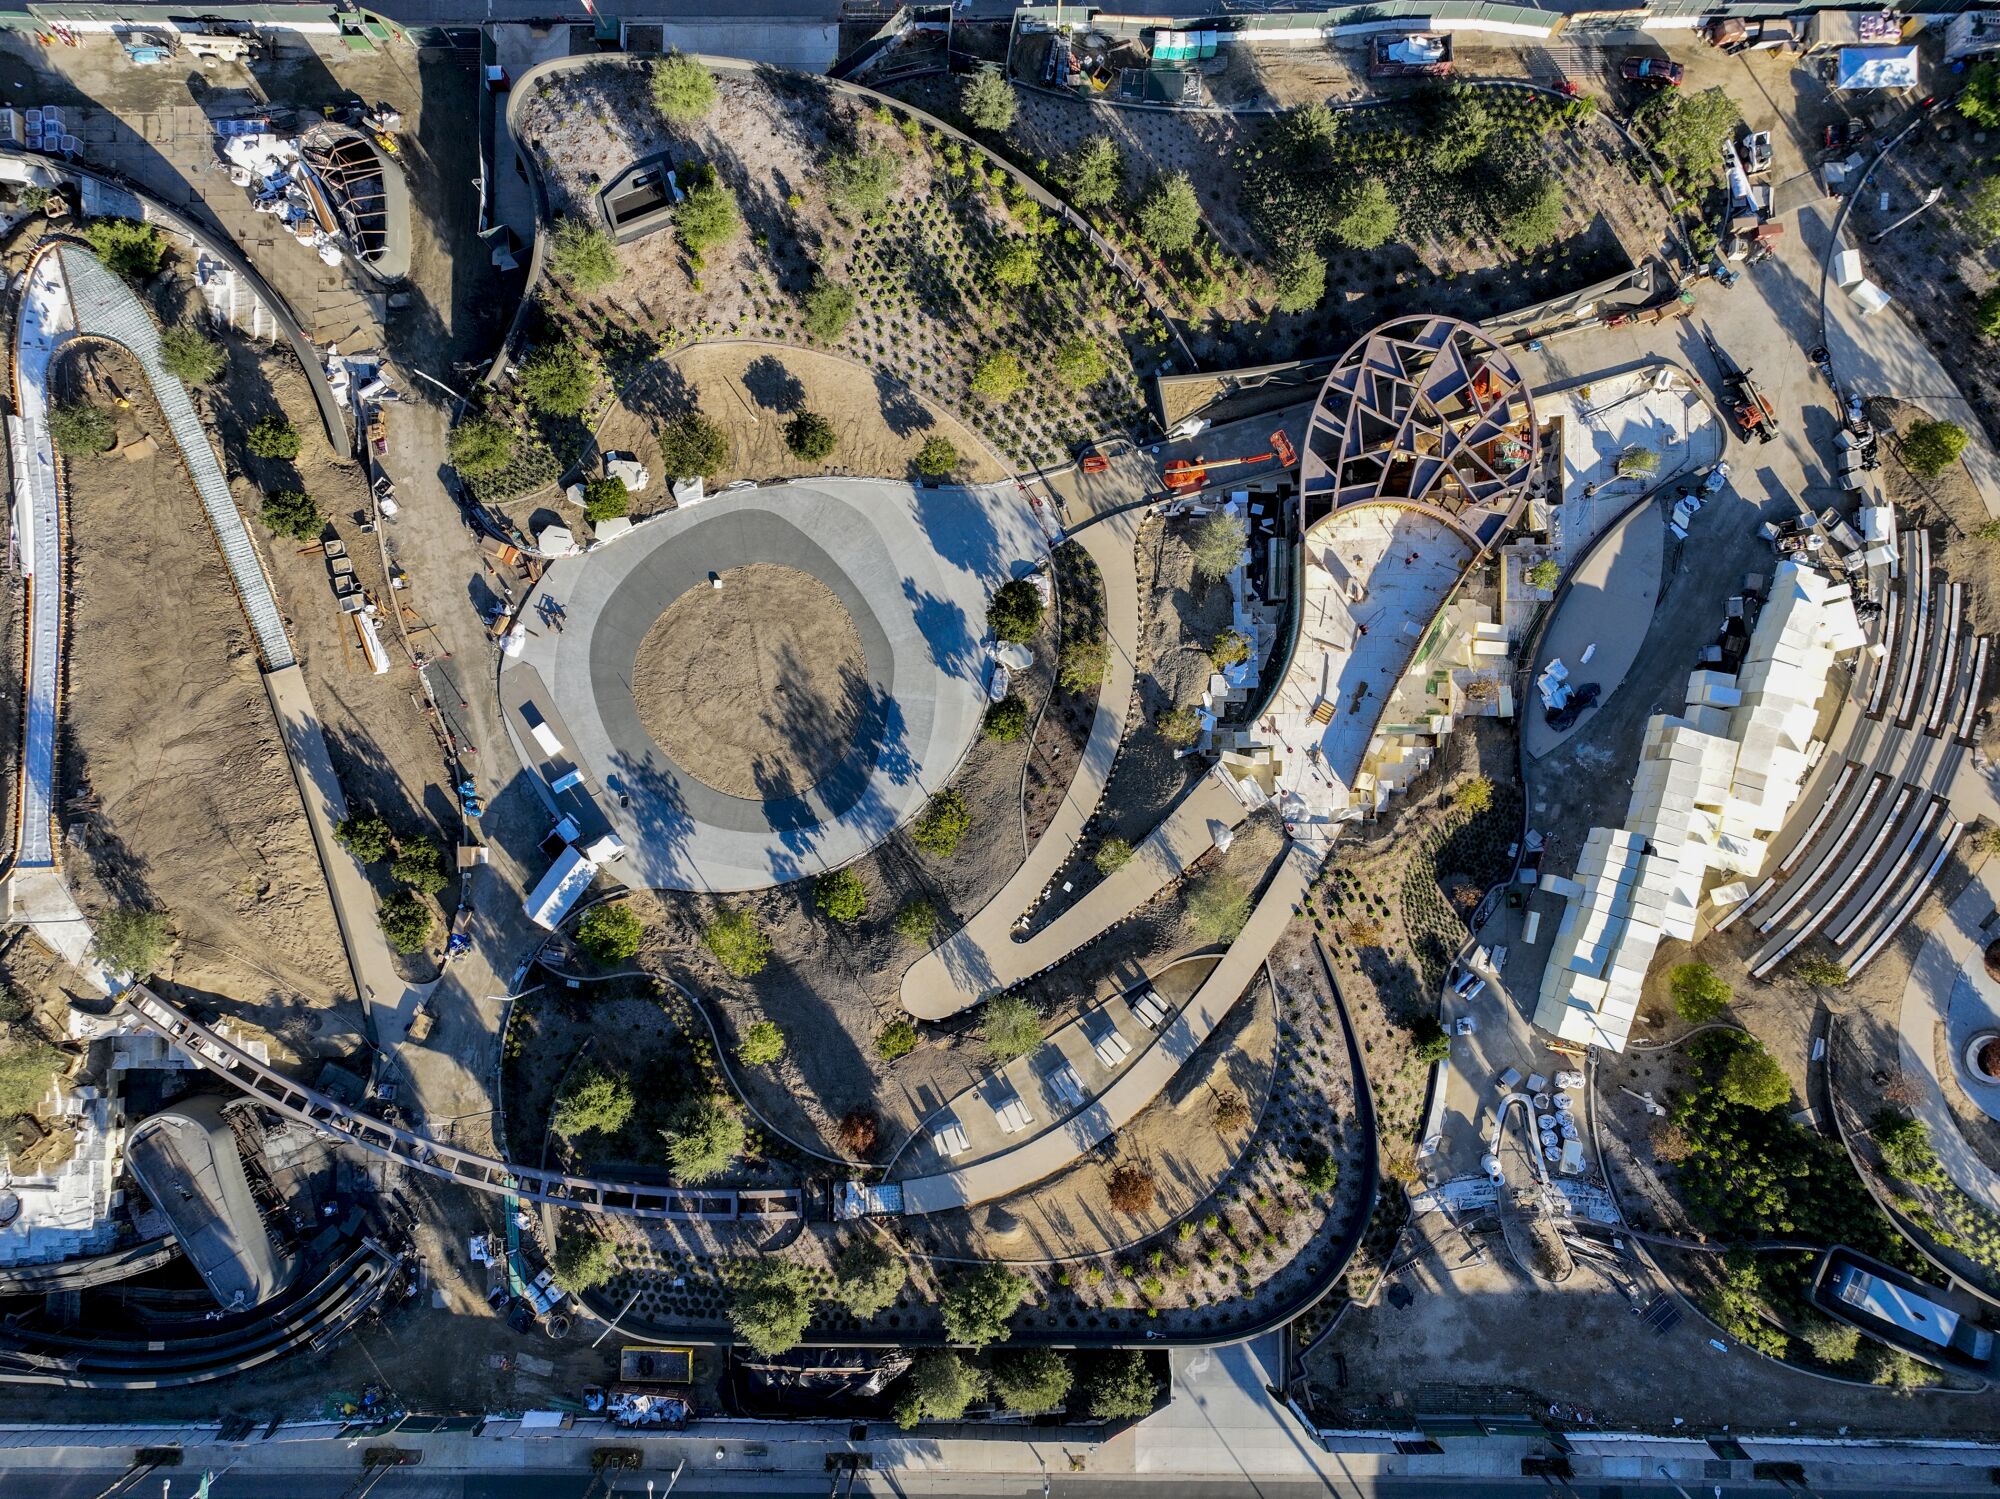 Aerial view of the park area adjacent to the Lucas Museum of Narrative Art under construction